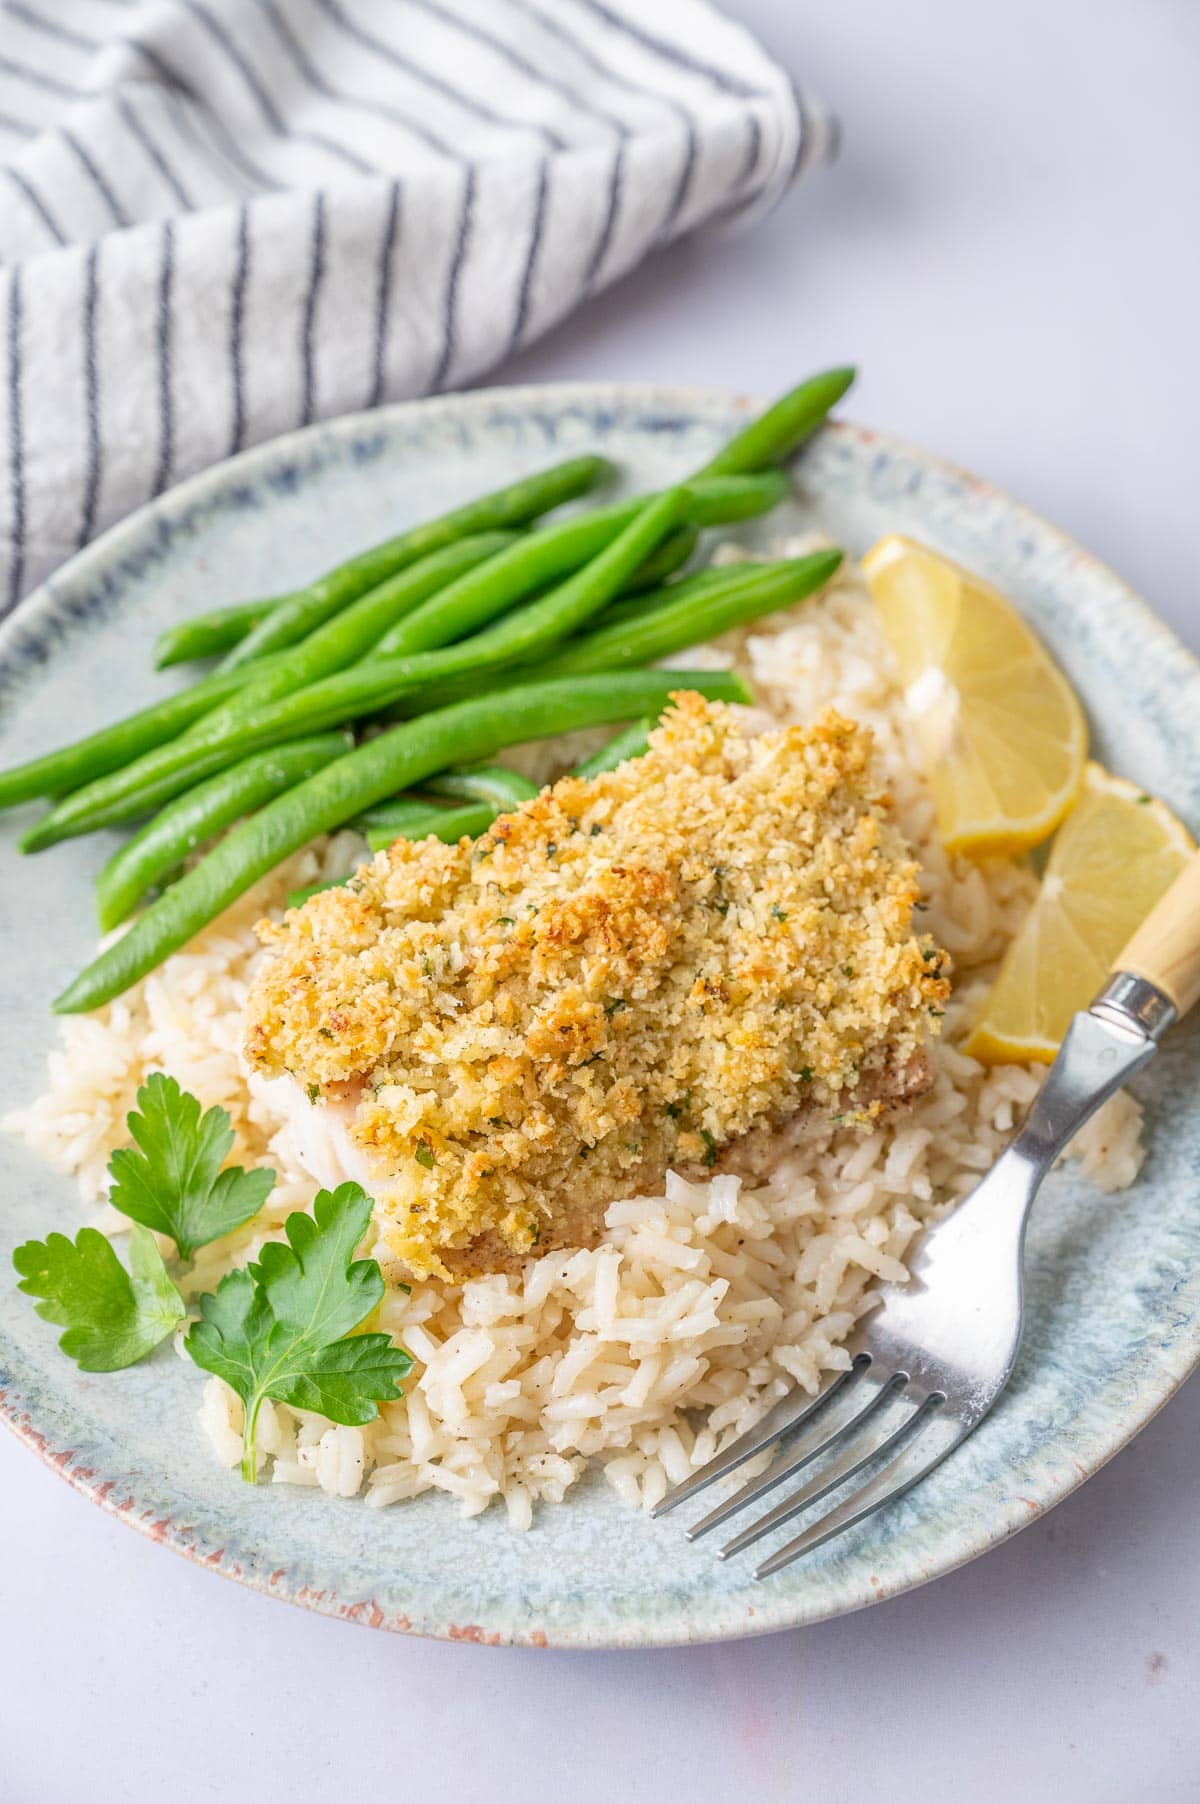 Parmesan crusted cod with butter garlic rice and green beans on a blue plate.